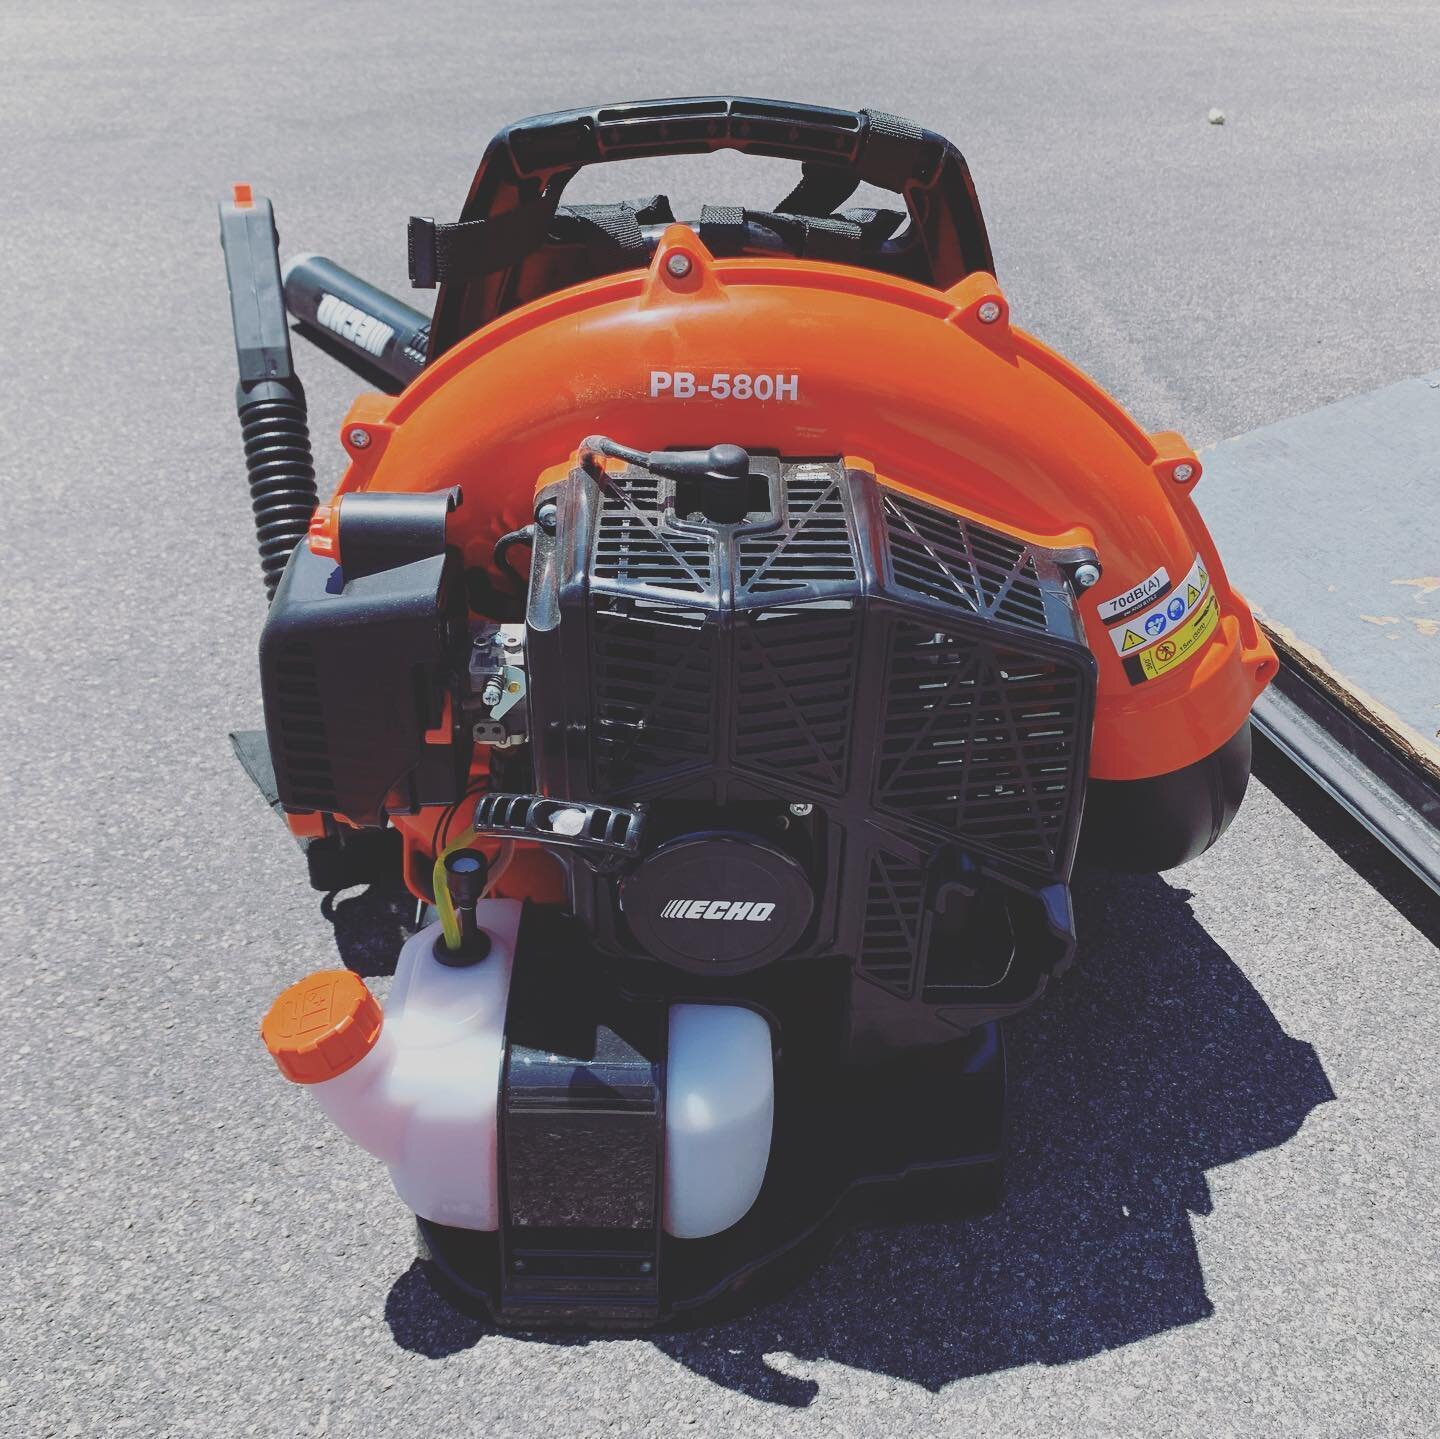 Picked up some new toys yesterday! Having tools in good condition allows us to work more efficiently and better maintain our client&rsquo;s properties! #echo #landscapemaintenance #lasvegaslandscape #groundsmaintenance #powertools #2stroke